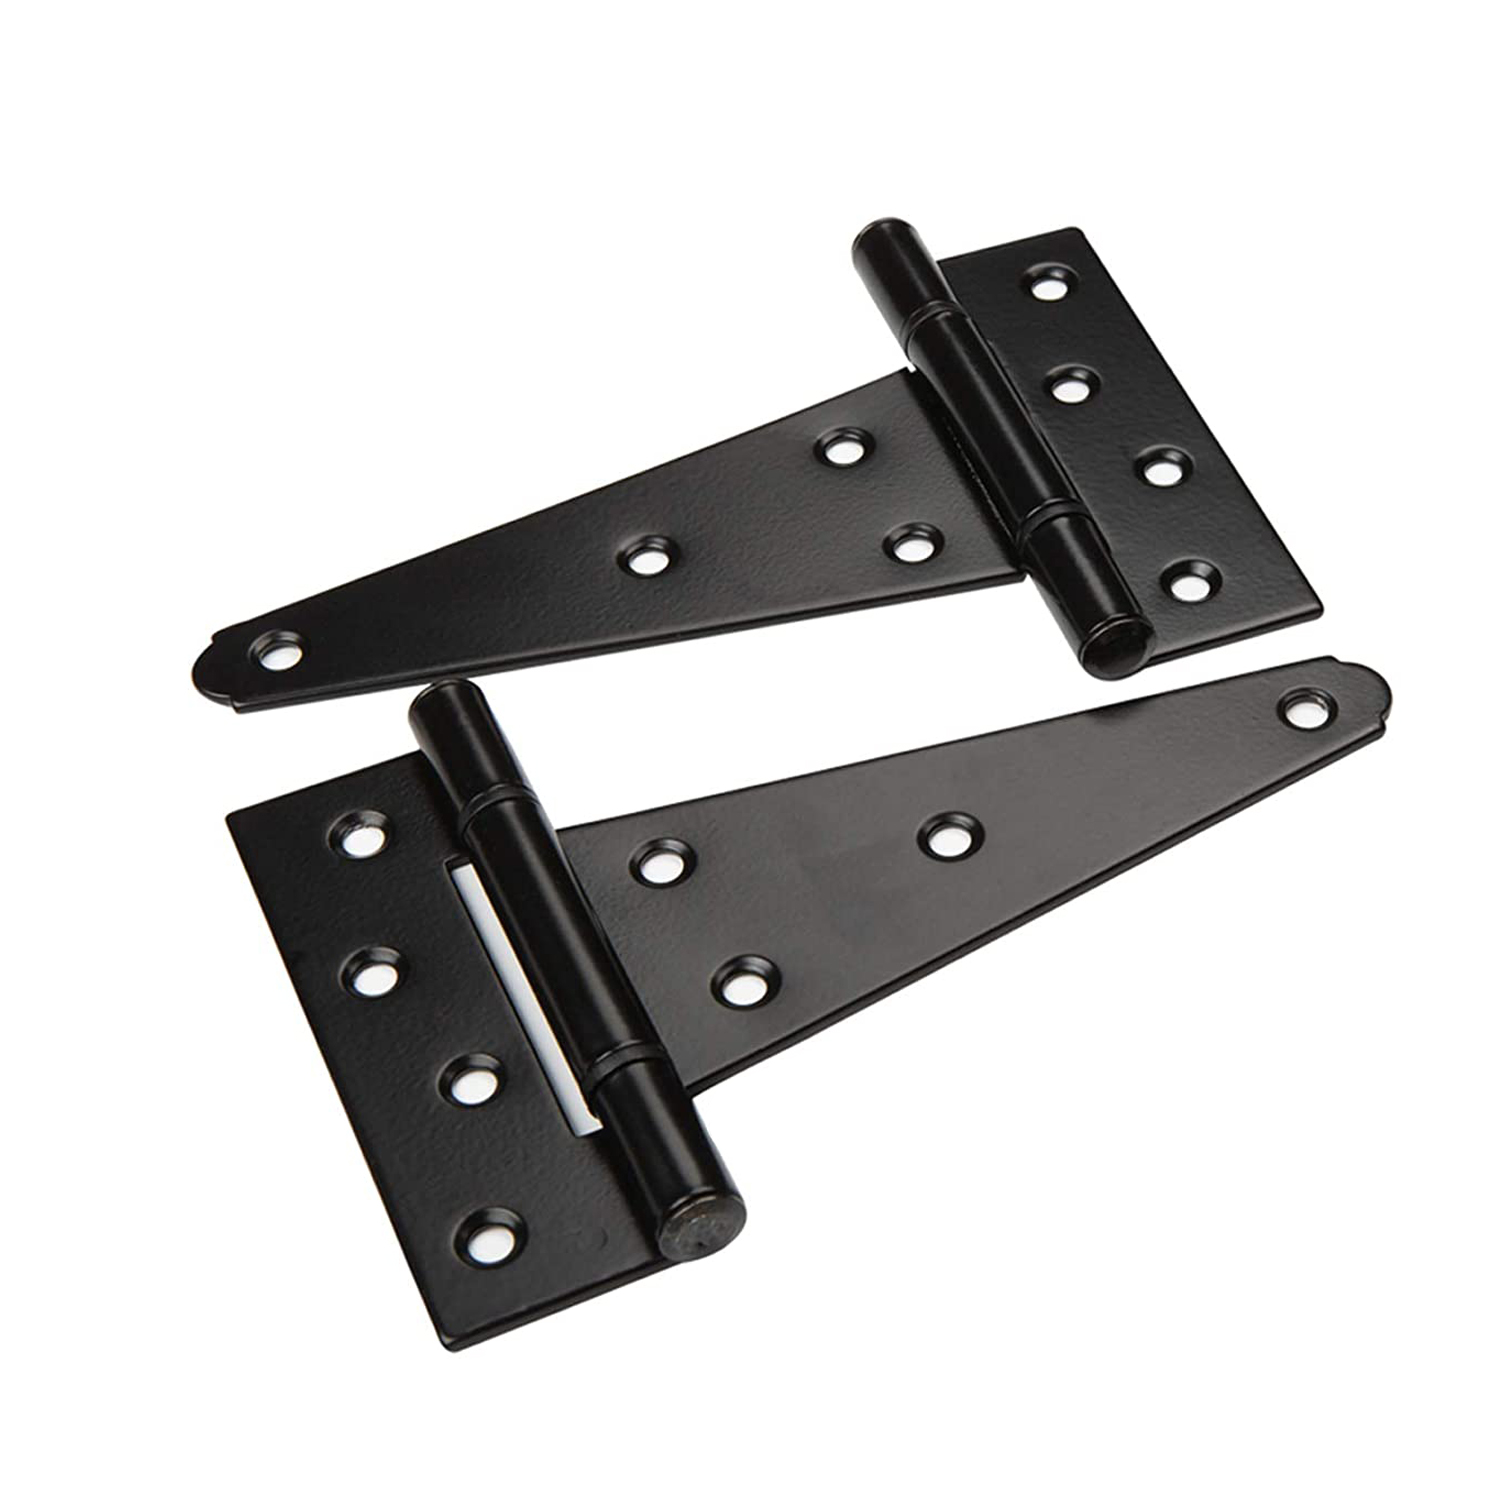 Latch,Light T Hinges Black Gate Fixing Kit Spring Closer /Screws Included 